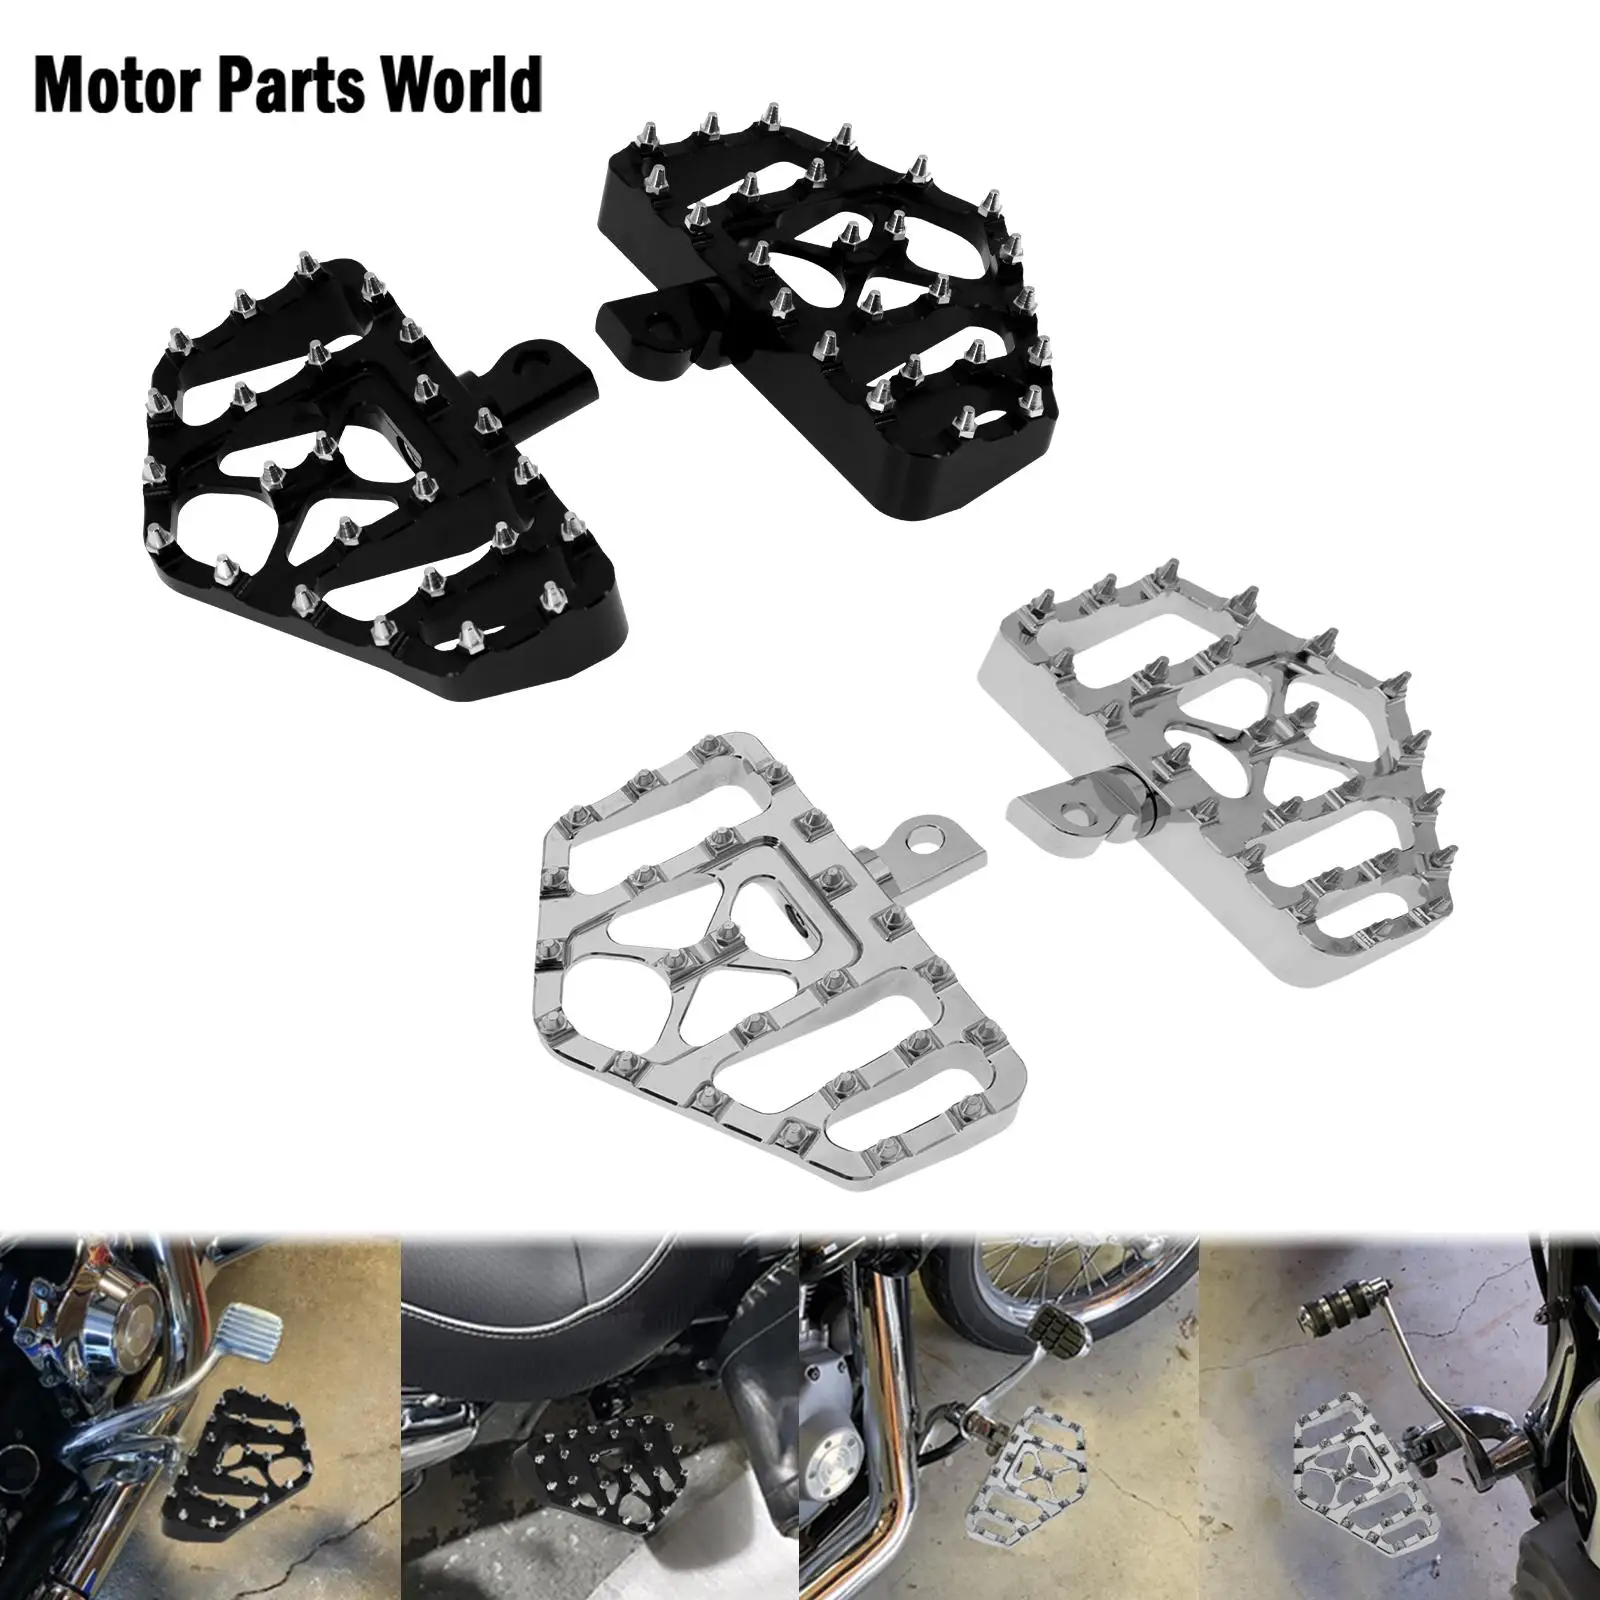 Motorcycle CNC Wide Foot Pegs Black/Chrome Floorboard For Harley Dyna To... - $122.50